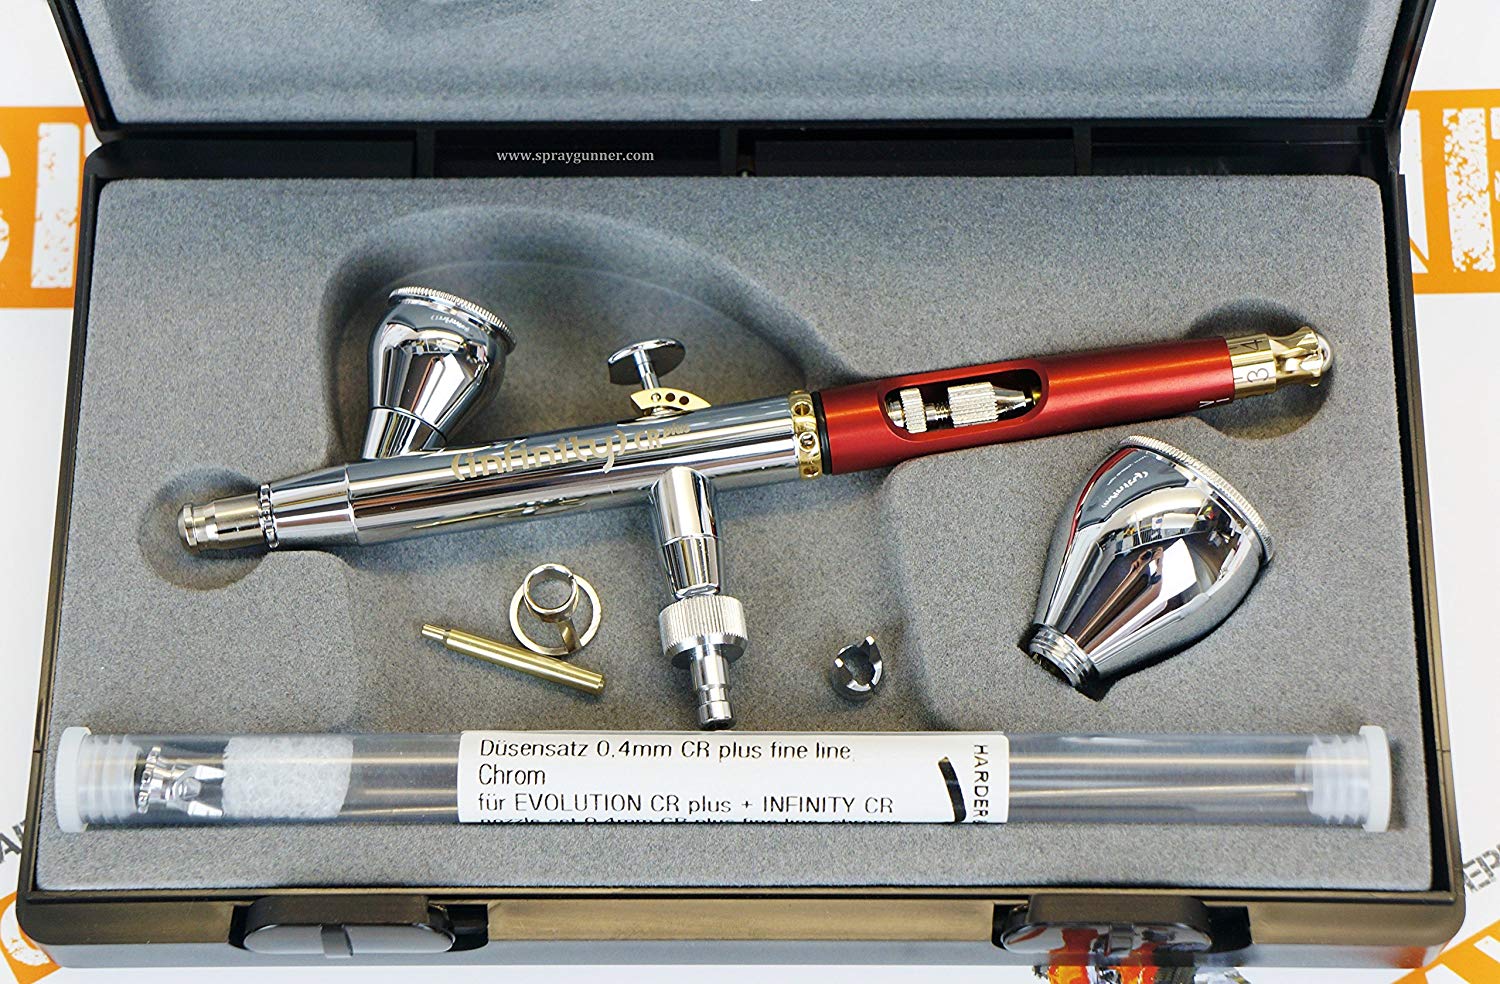  Harder & Steenbeck Evolution CR Plus Two in One 2in1 Airbrush  126234 by SprayGunner : Arts, Crafts & Sewing